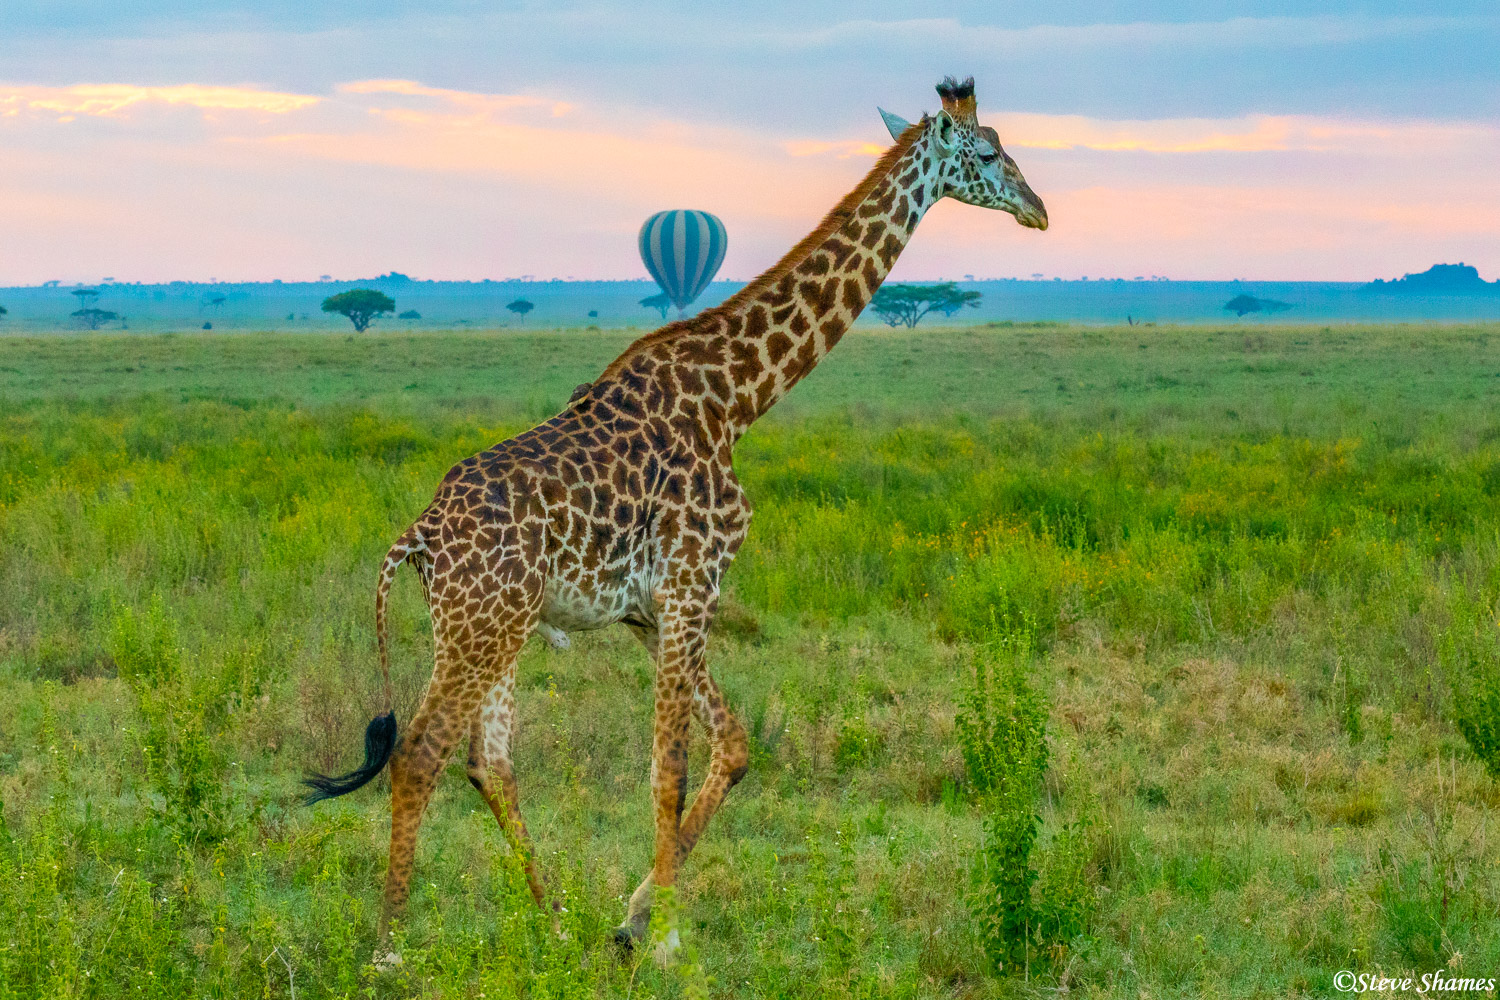 Hot air balloons take off almost every morning in the Serengeti. This giraffe seems to be carrying one on his shoulder.